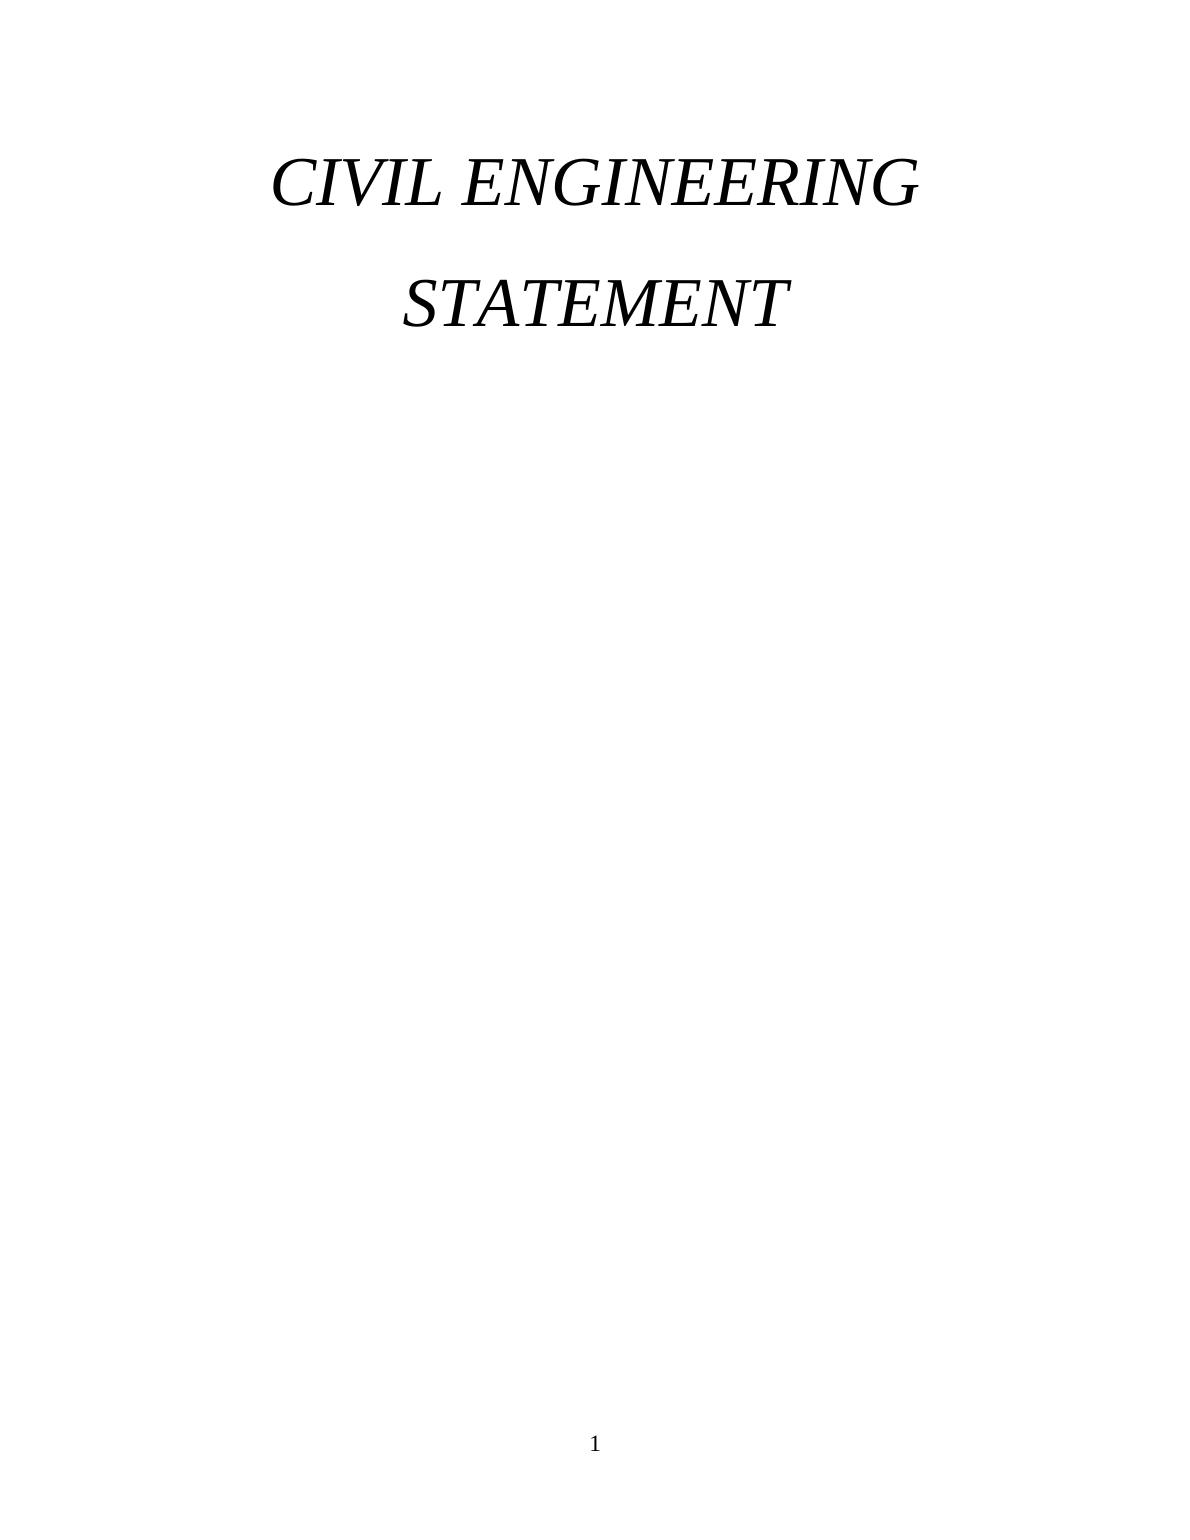 personal statement for civil engineering